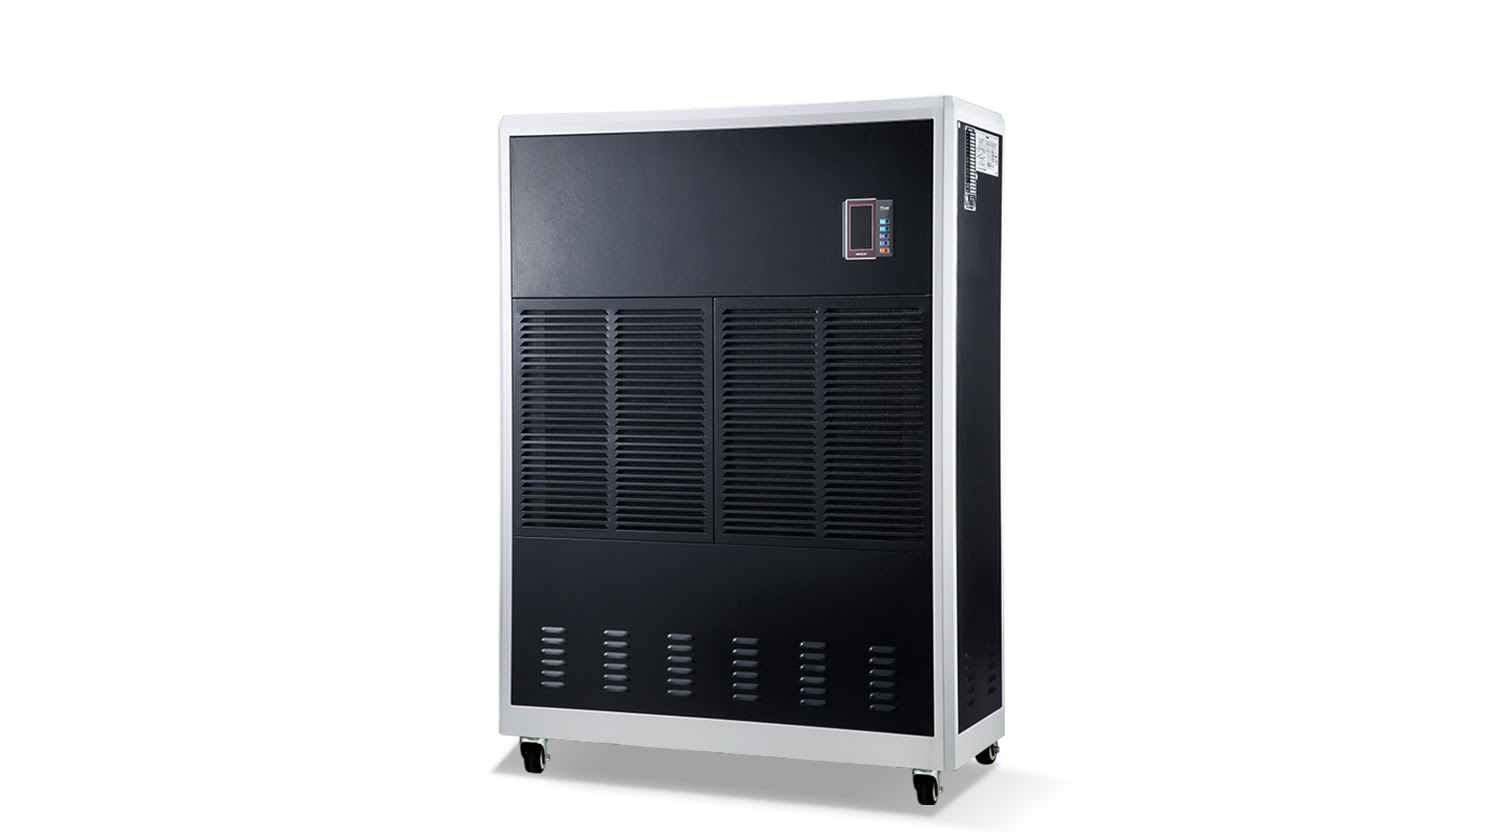 Drying type heating and dehumidification machine, auxiliary heating and powerful dehumidification